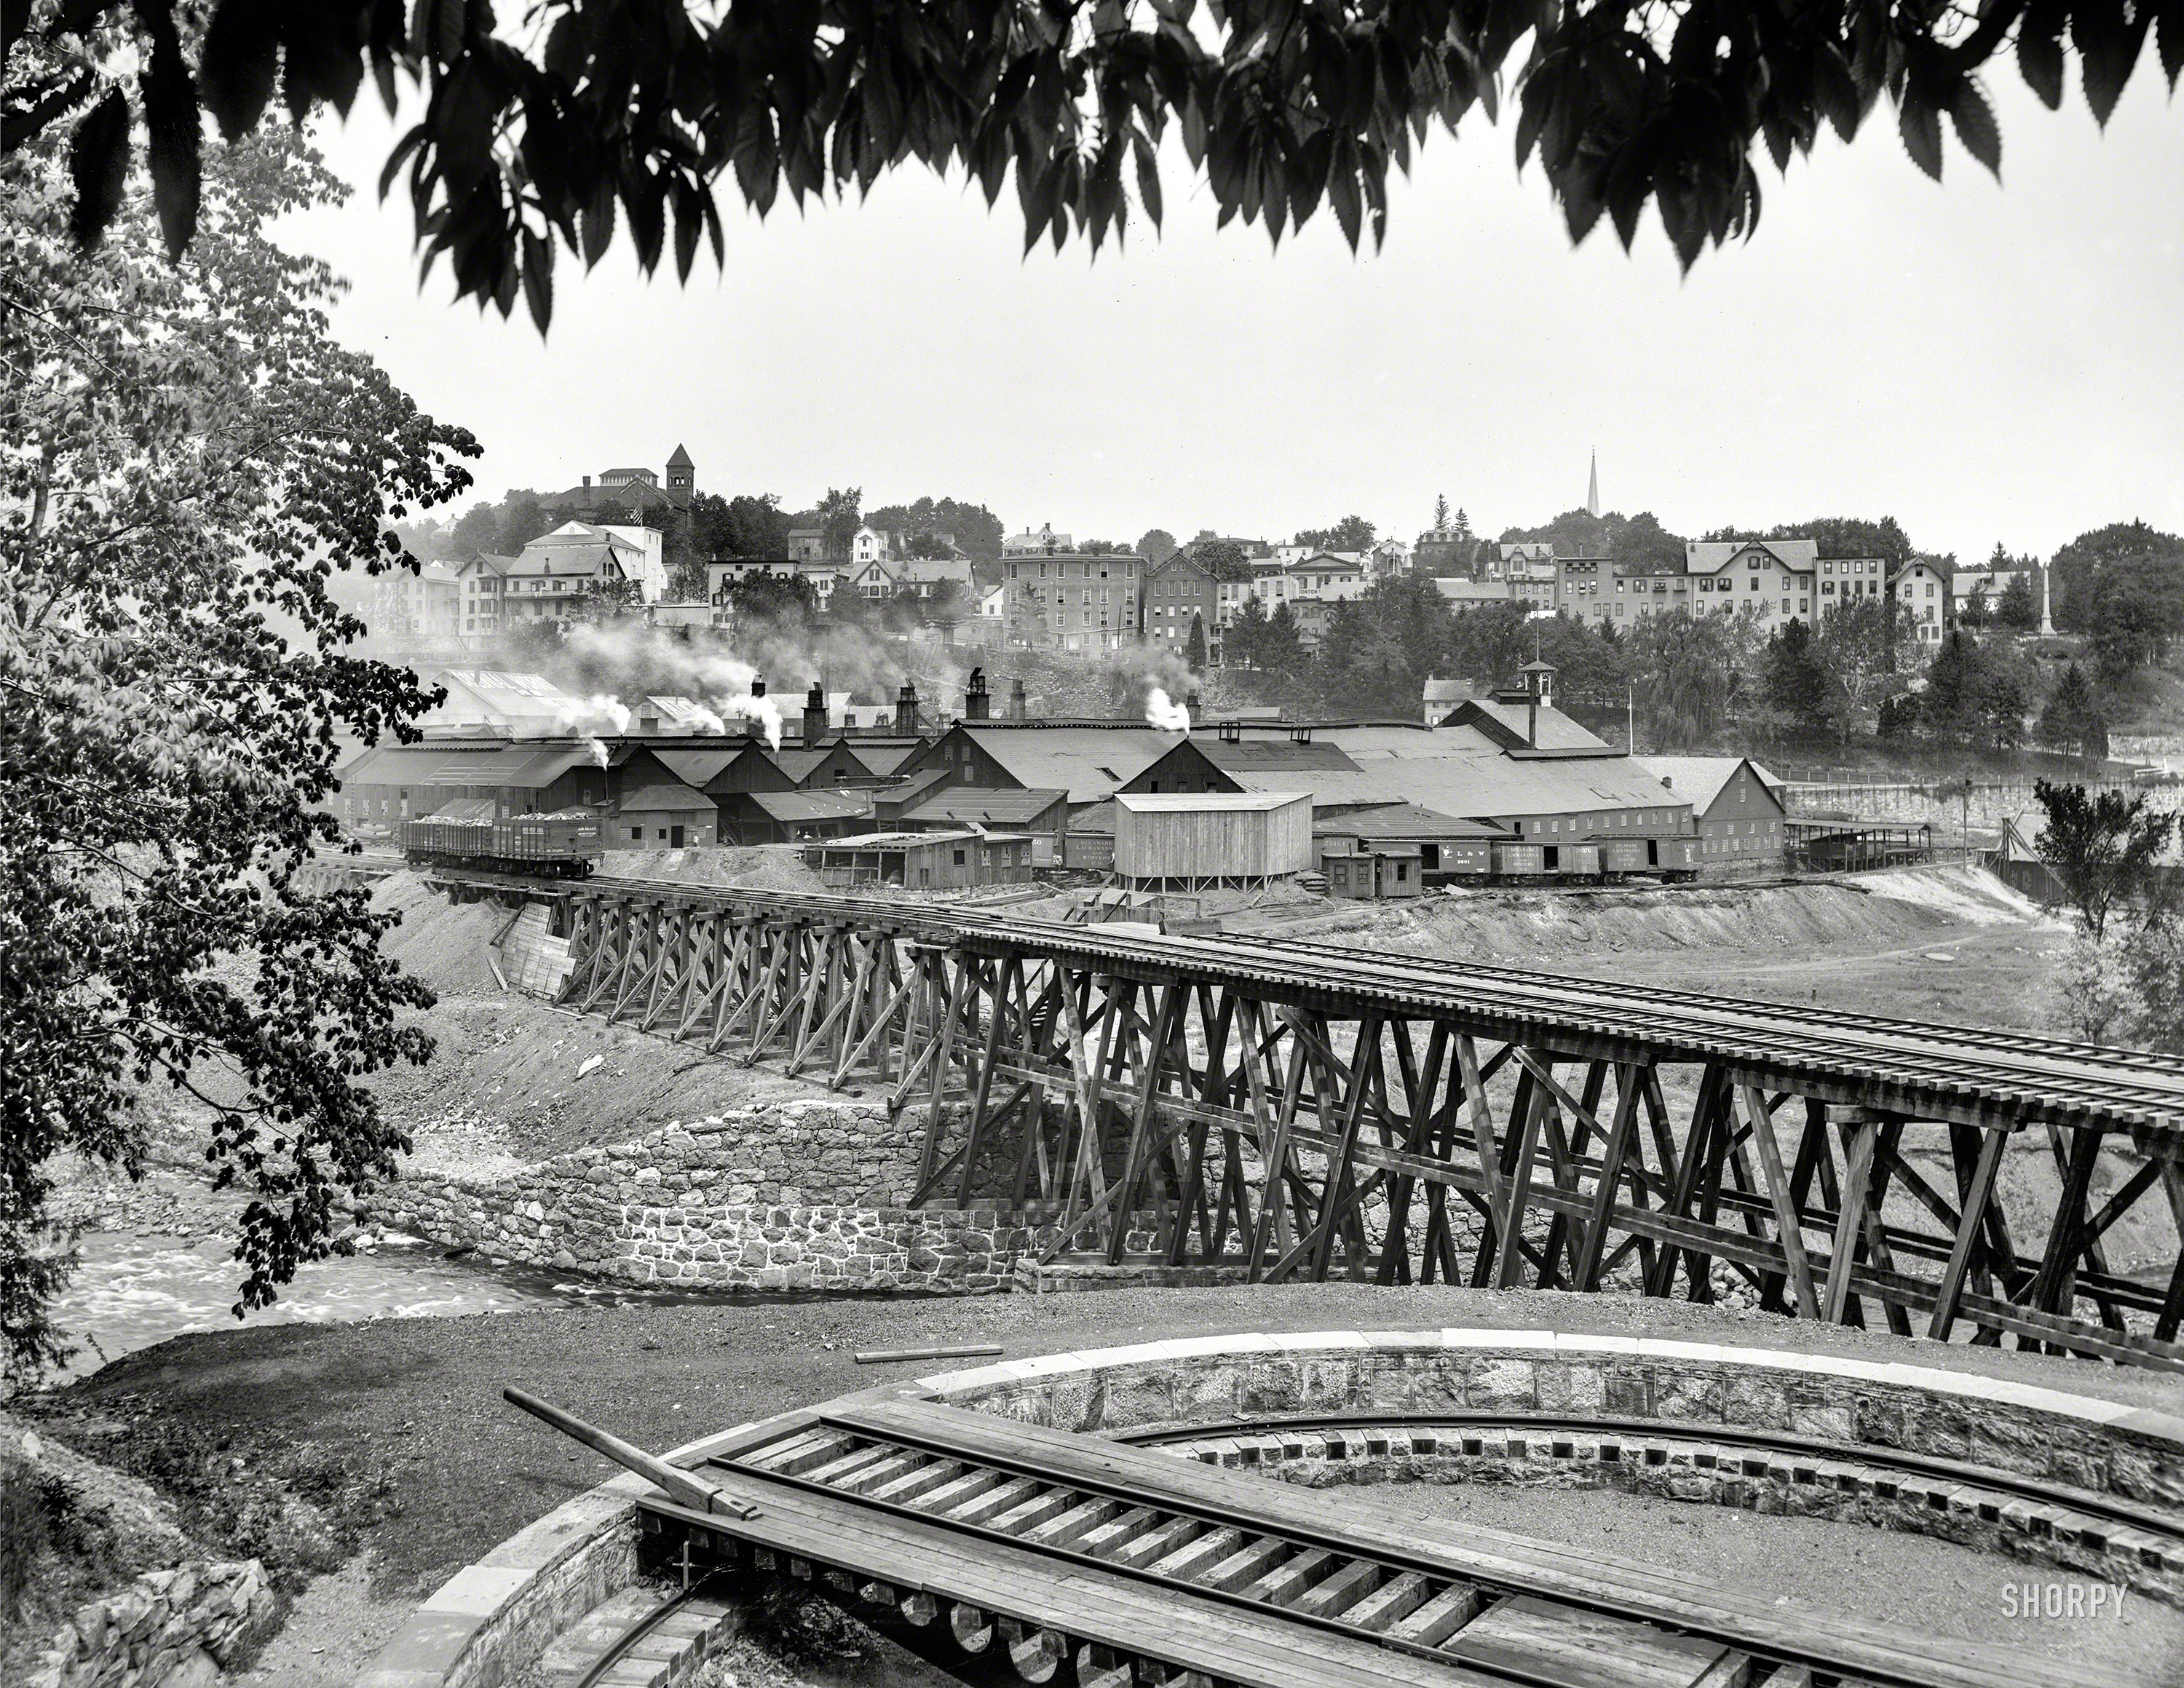 Circa 1901. "Railroad tracks and trestle at Boonton, New Jersey." 8x10 inch dry plate glass negative, Detroit Publishing Company. View full size.